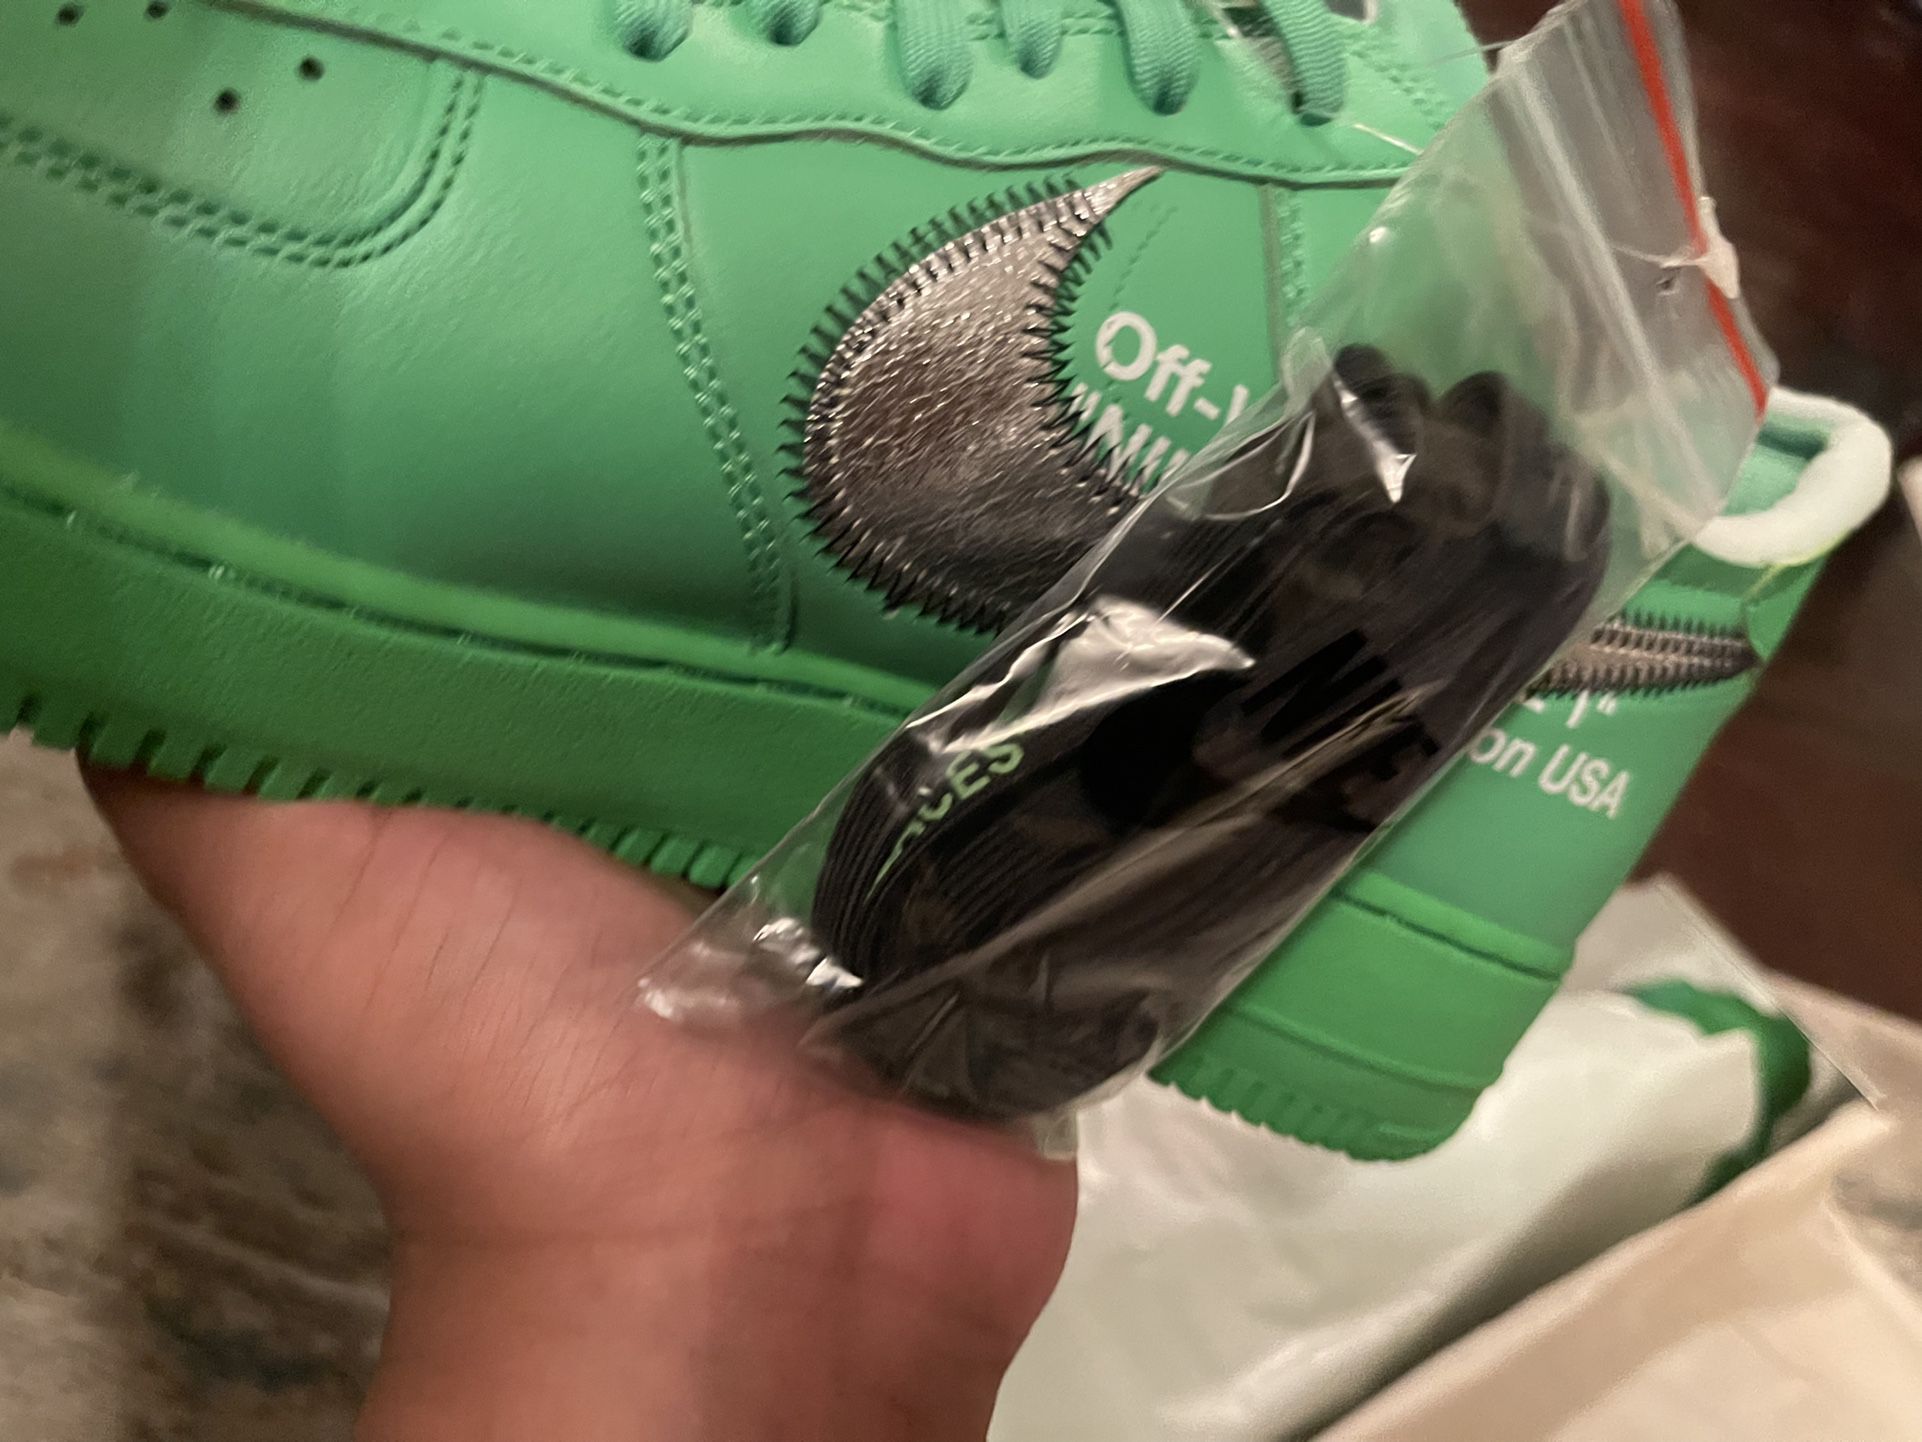 OFF WHITE NIKE AIR FORCE 1 LOW AF1 BROOKLYN GREEN SPARK WHITE BLACK NEW  SALE SNEAKERS SHOES MEN SIZE 9.5 43 A4 for Sale in Miami, FL - OfferUp